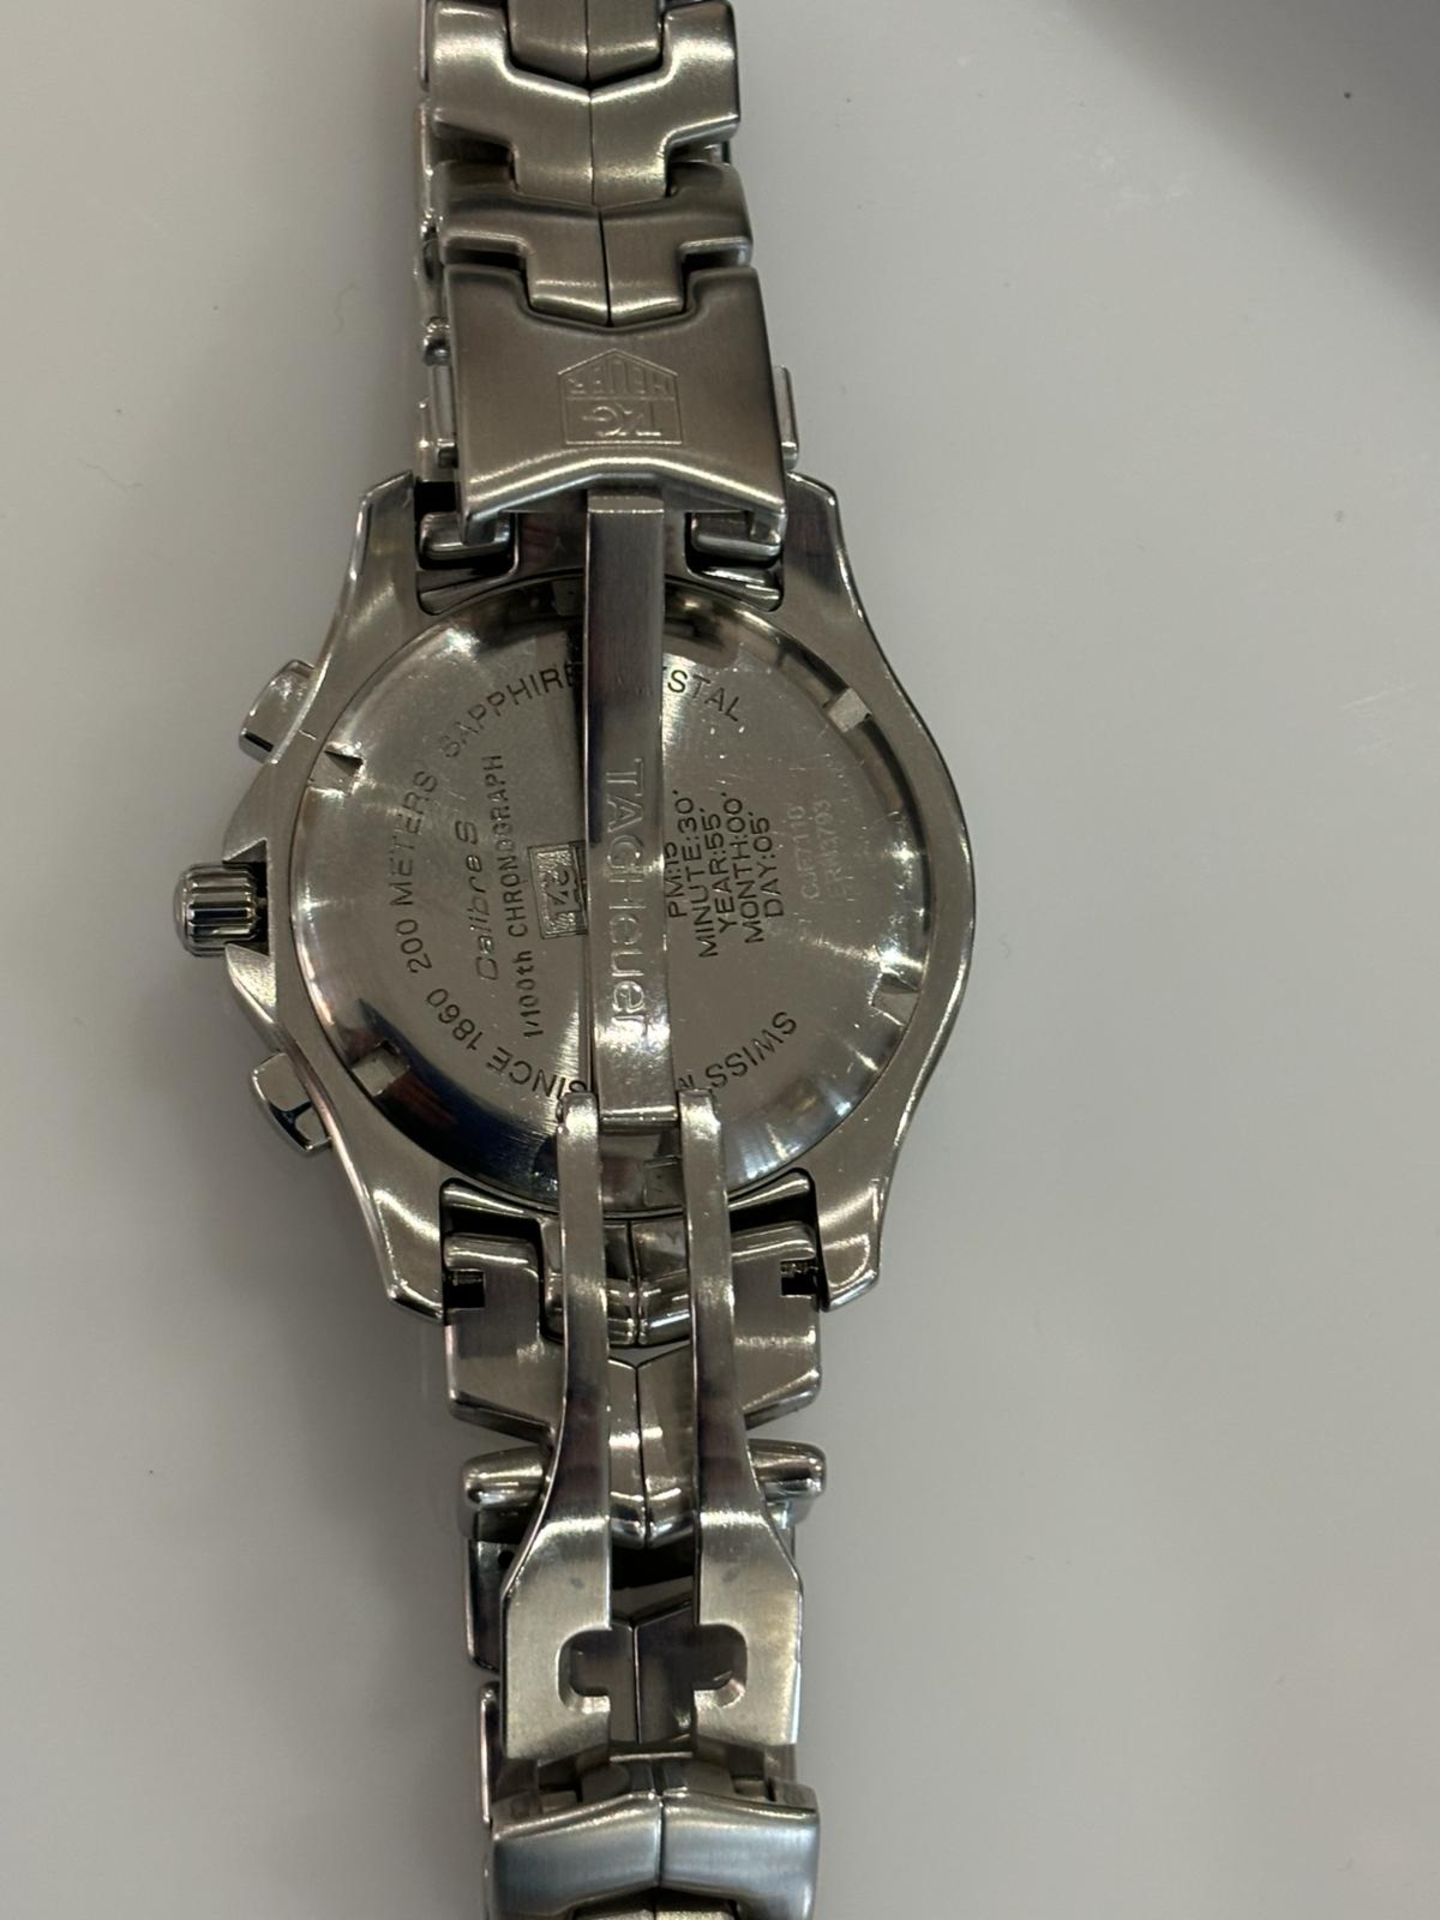 Tag Heuer - Stainless Steel Link Calibre S Quartz Chronograph Bracelet Watch - Image 3 of 6